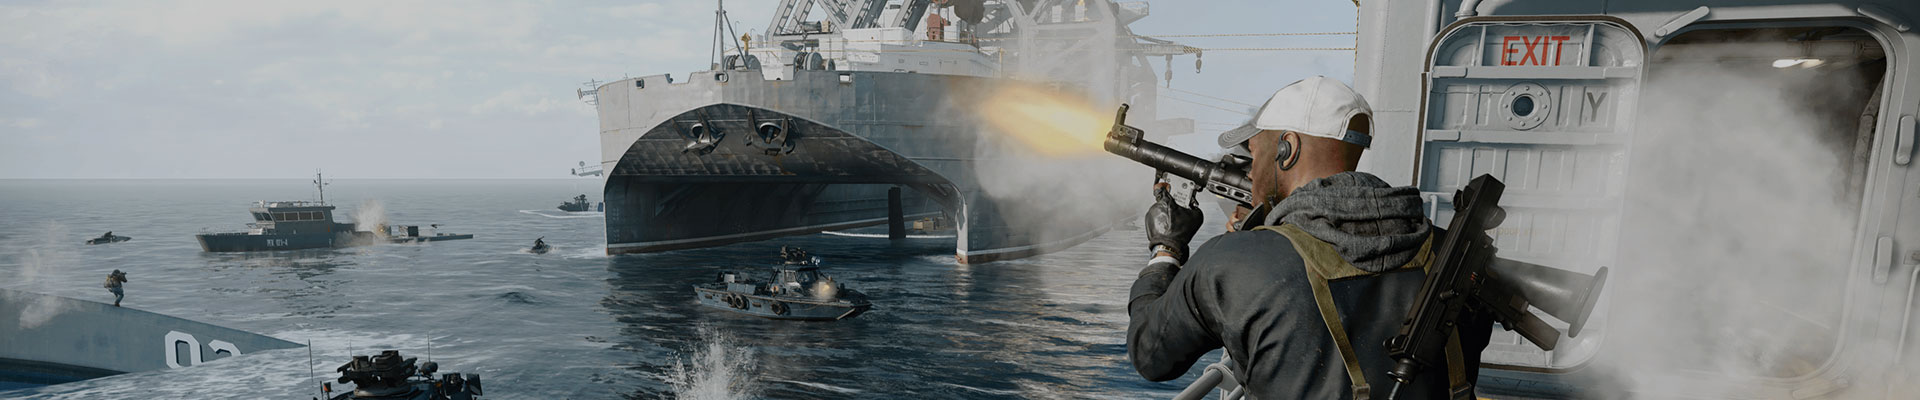 STRENGTHEN YOUR AIM WITH CALL OF DUTY AIMING TIPS FOR BLACK OPS COLD WAR